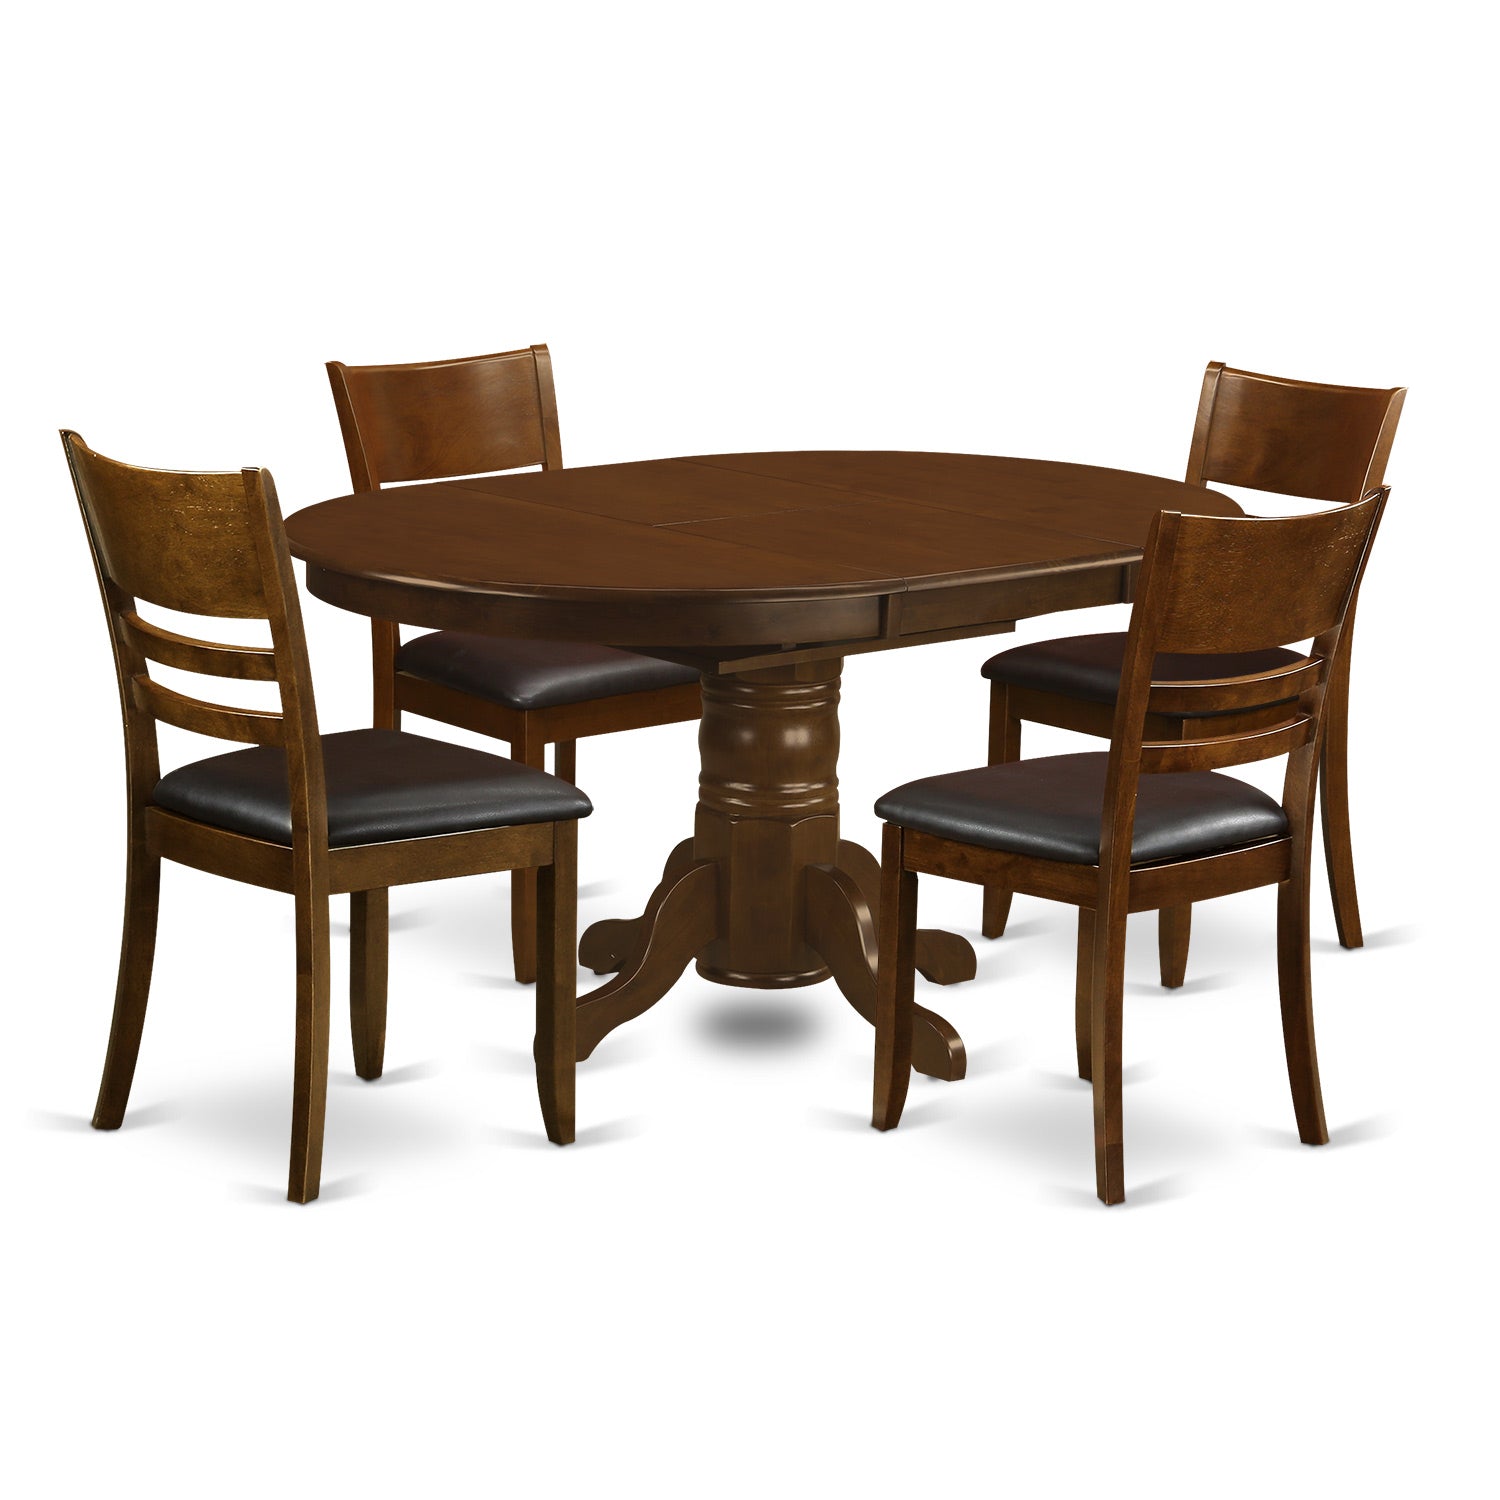 KELY5-ESP-LC 5 Pc Kenley with a 18" Leaf and 4 Leather Chairs